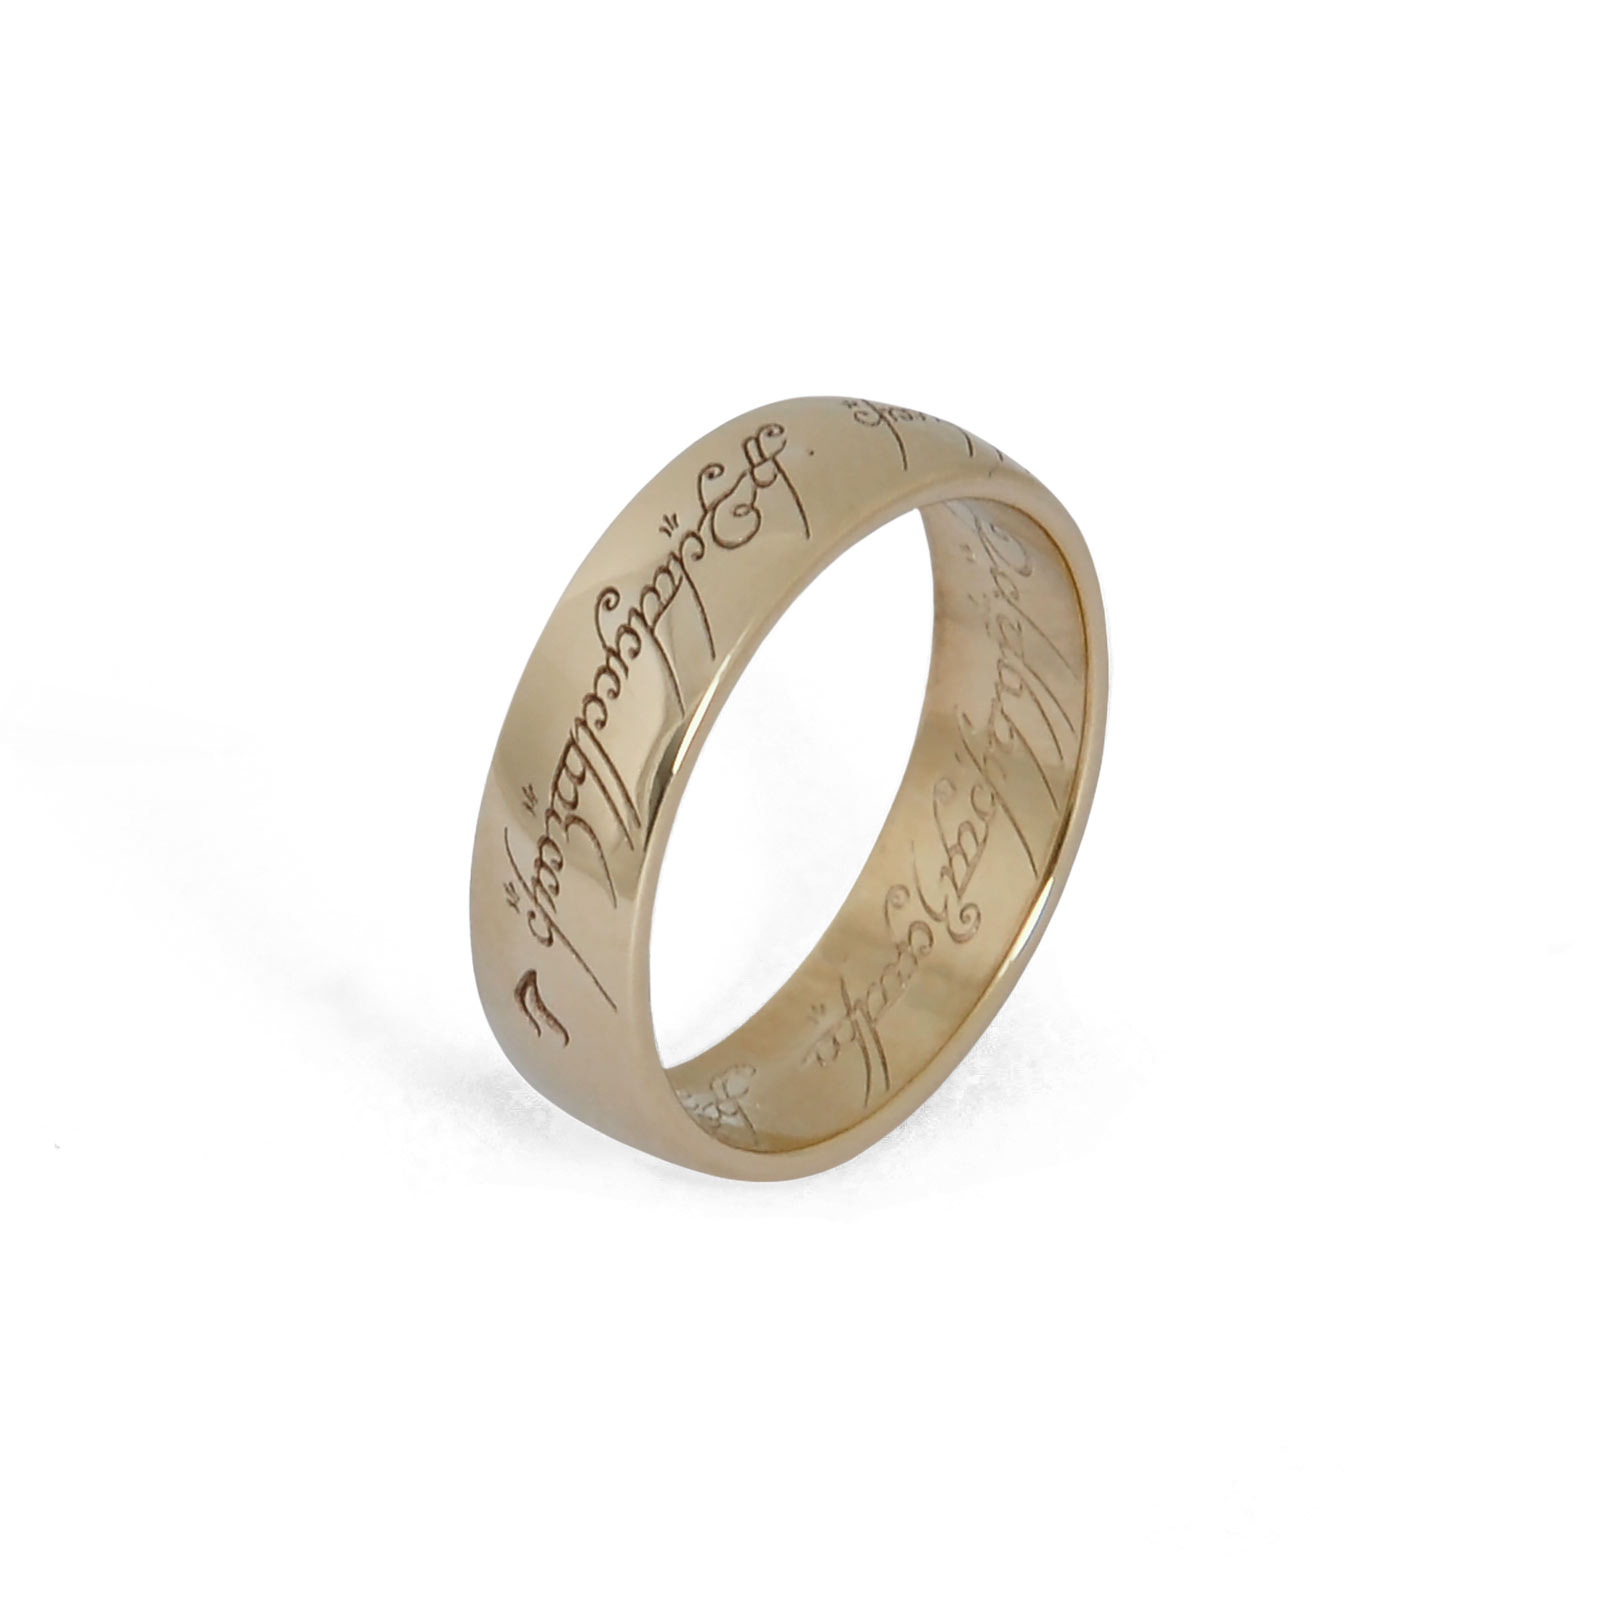 The Lord of the Rings - Ring Gold 8 Karat